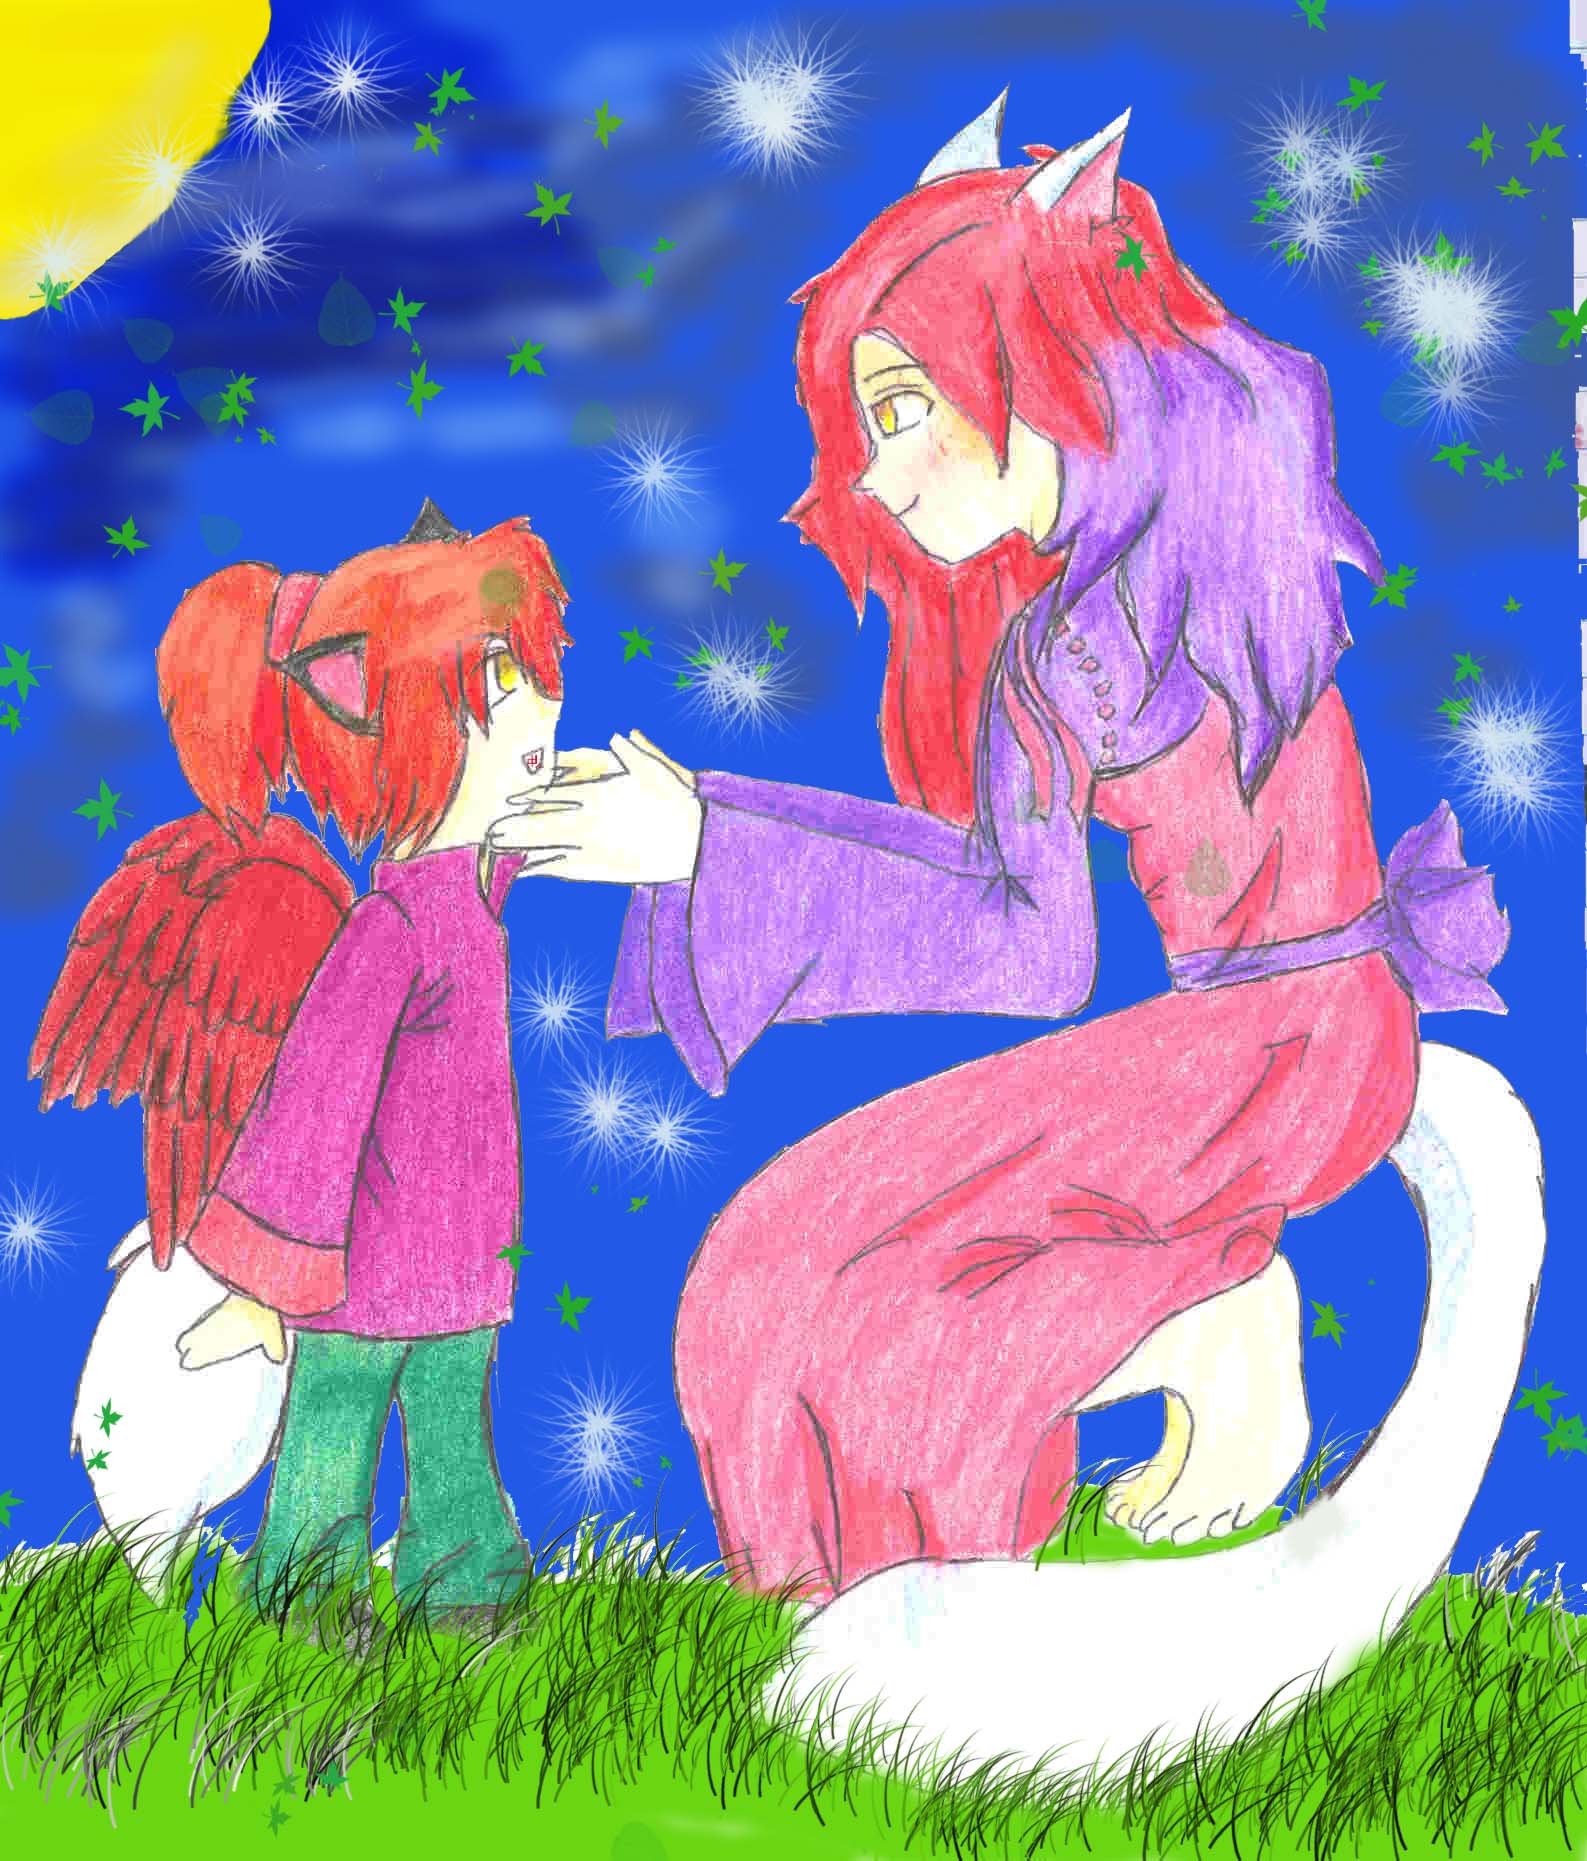 Child and Mother by catgirl_chan